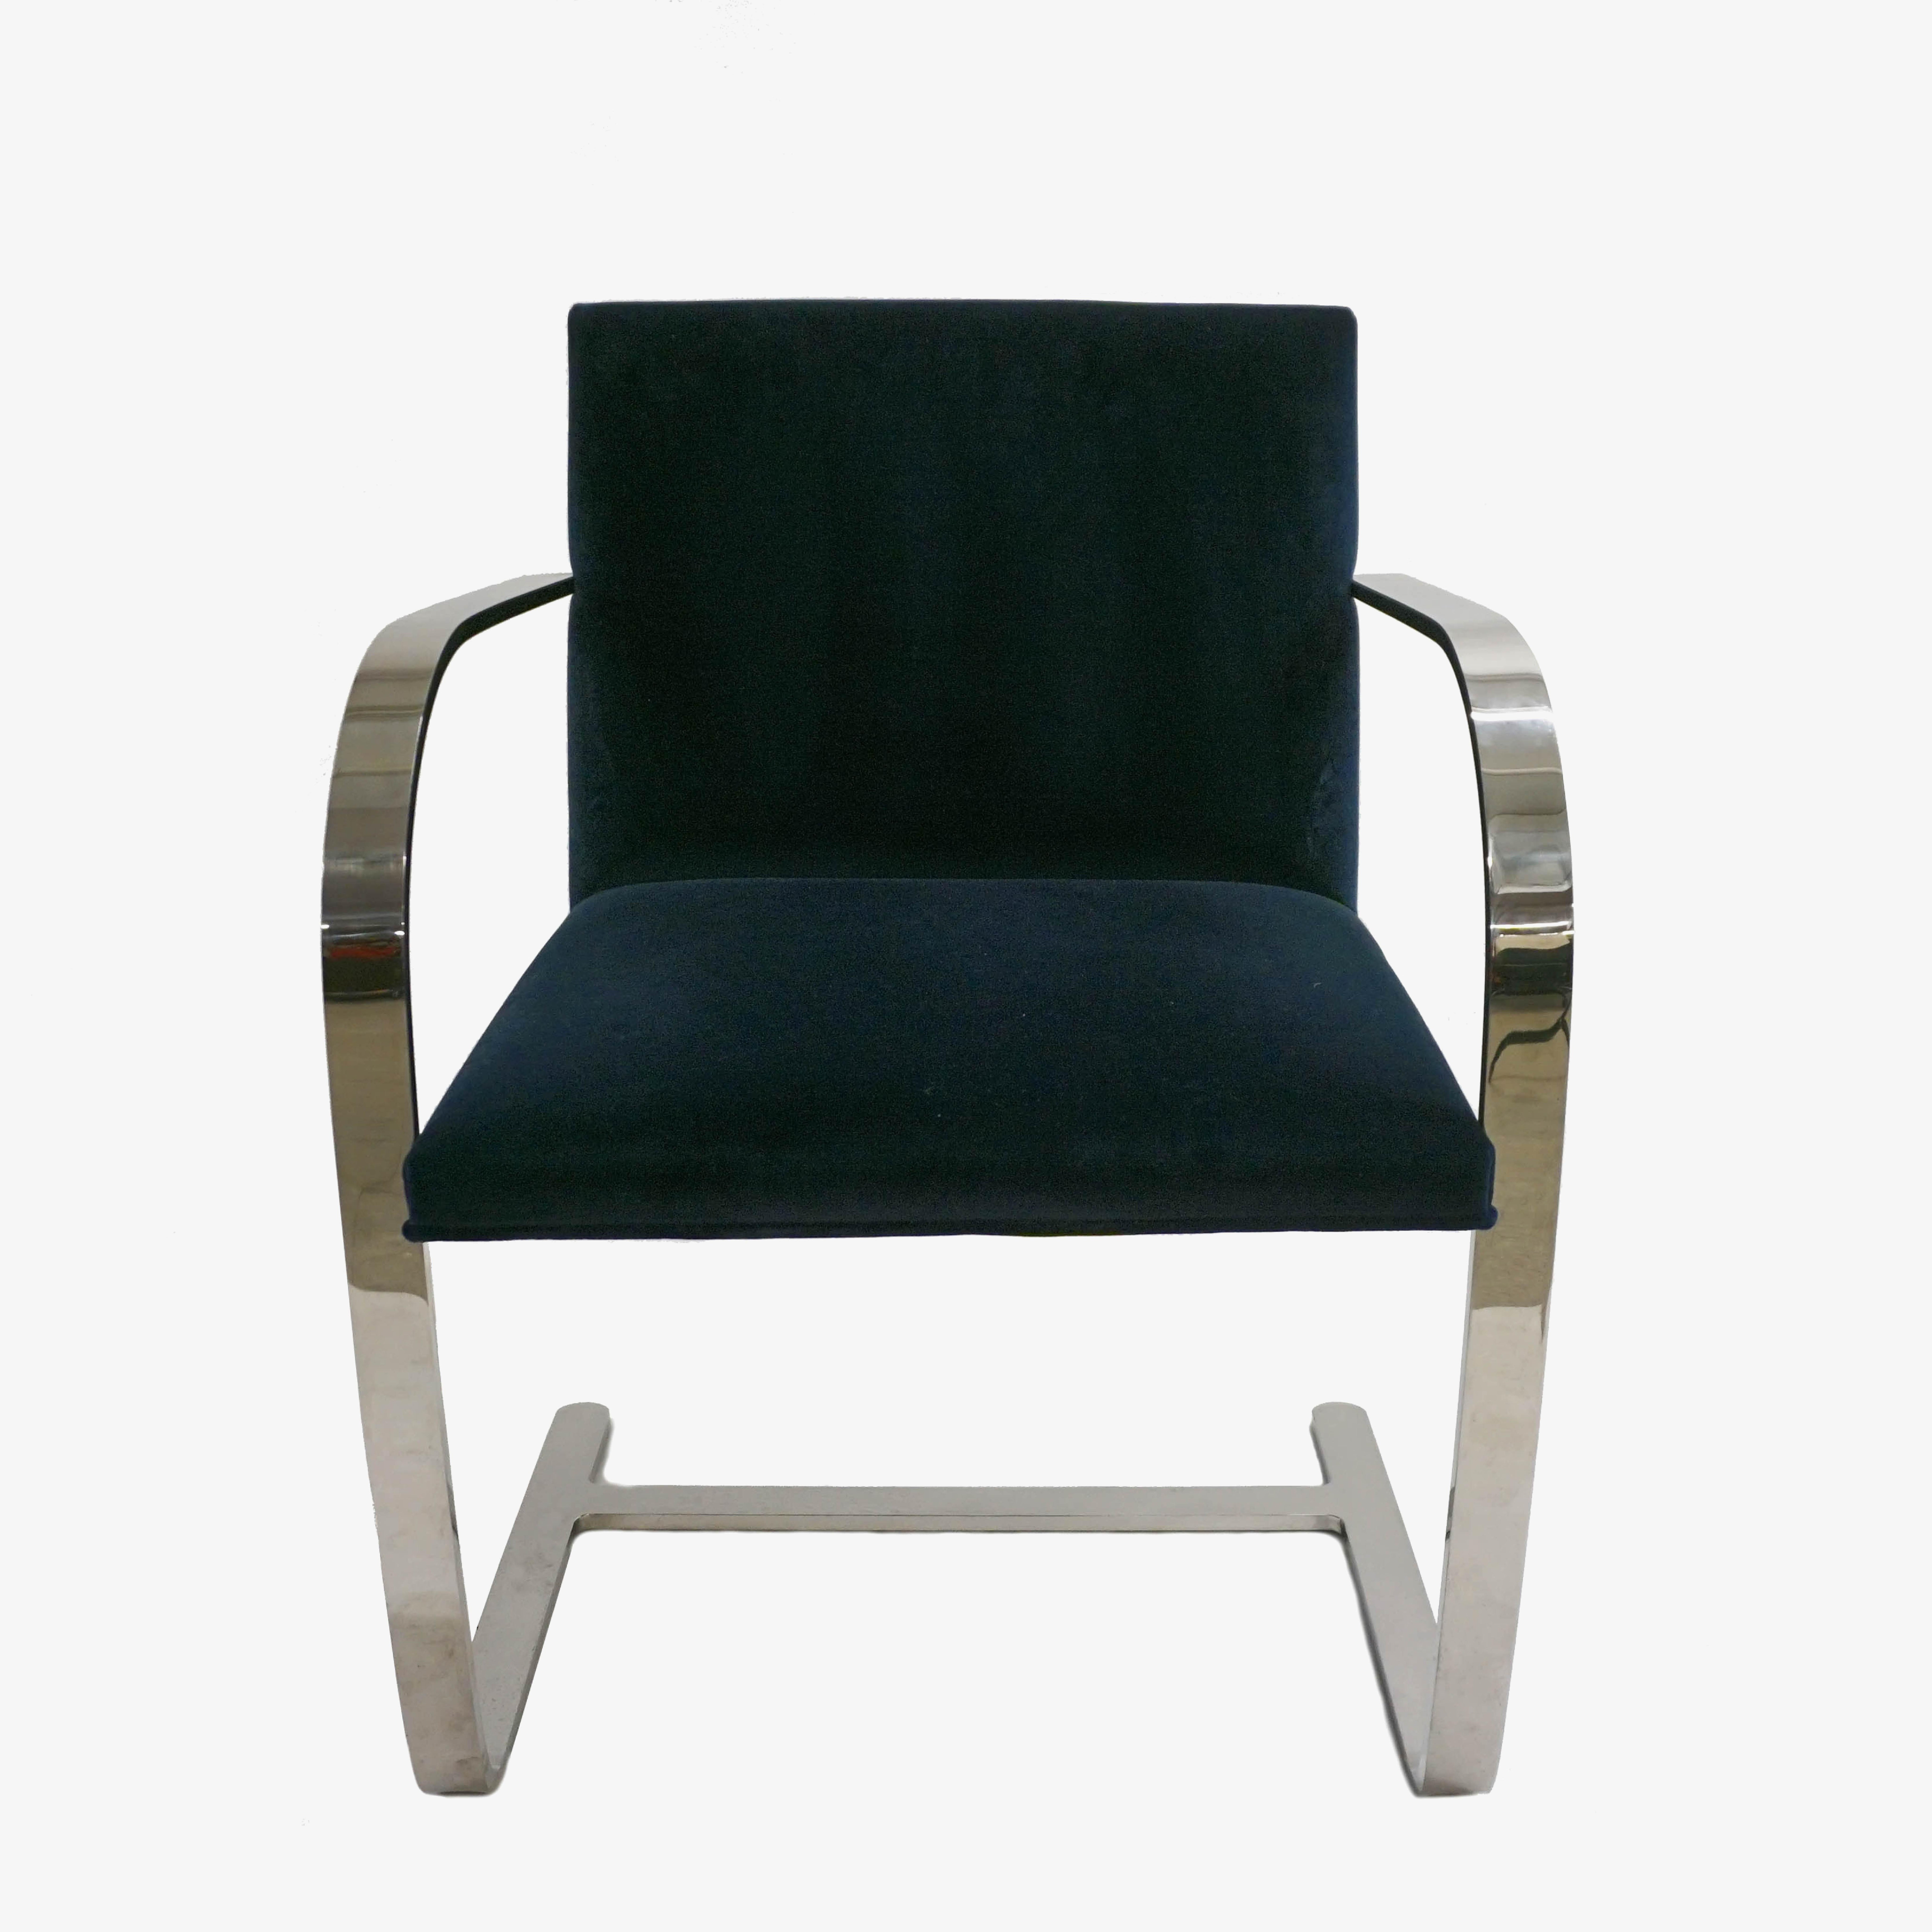 The definition of minimalism in a singular design, achieved by the great Ludwig Mies van der Rohe in 1929, the Brno flat-bar chair is just that. These are contemporary edition Mies van der Rohe for Knoll chairs upholstered in classic navy velvet, a